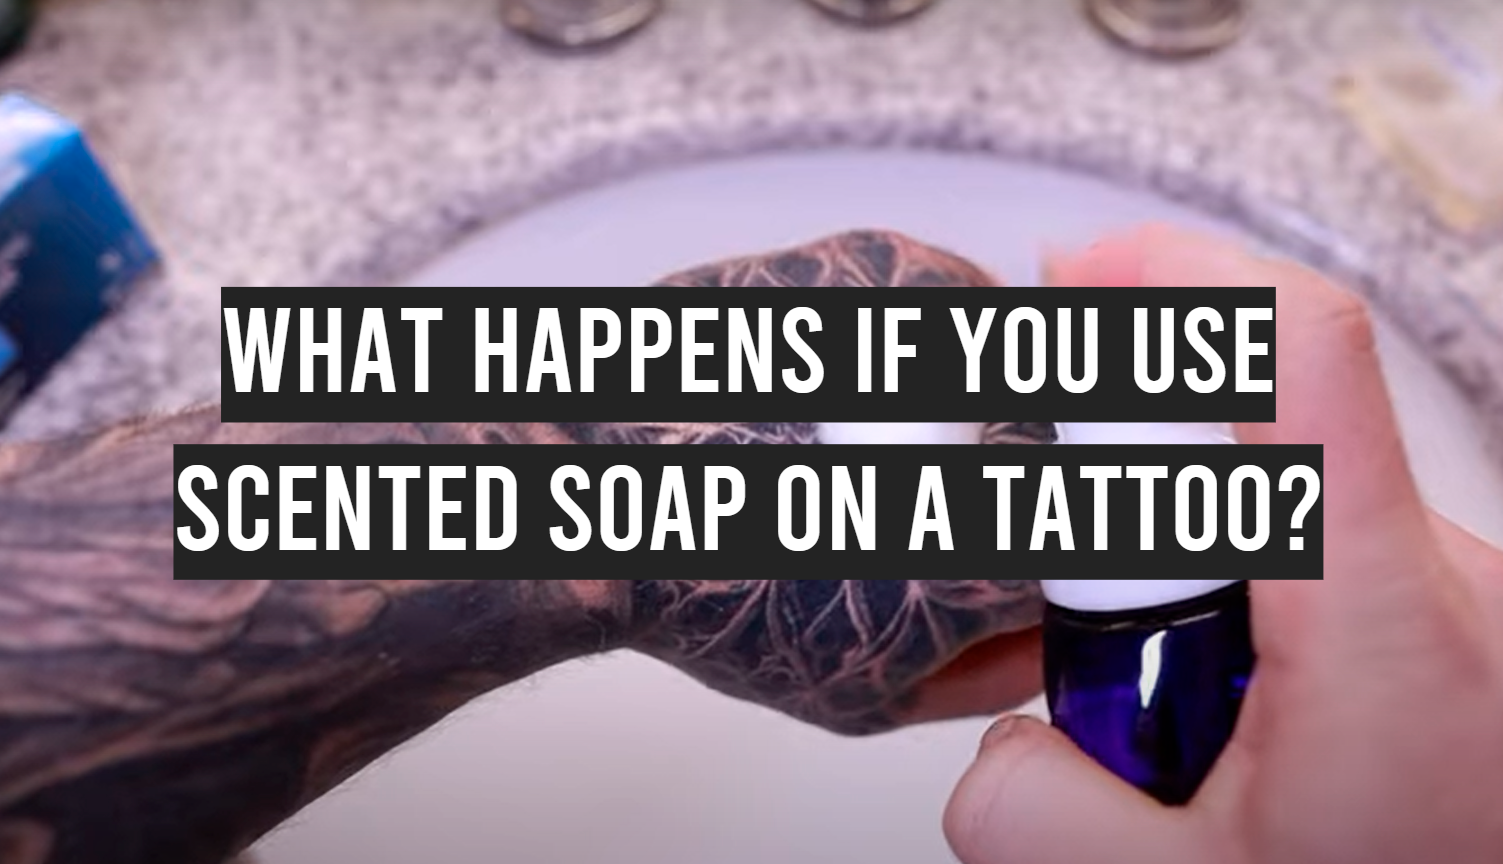 What happens if you use scented soap on a tattoo